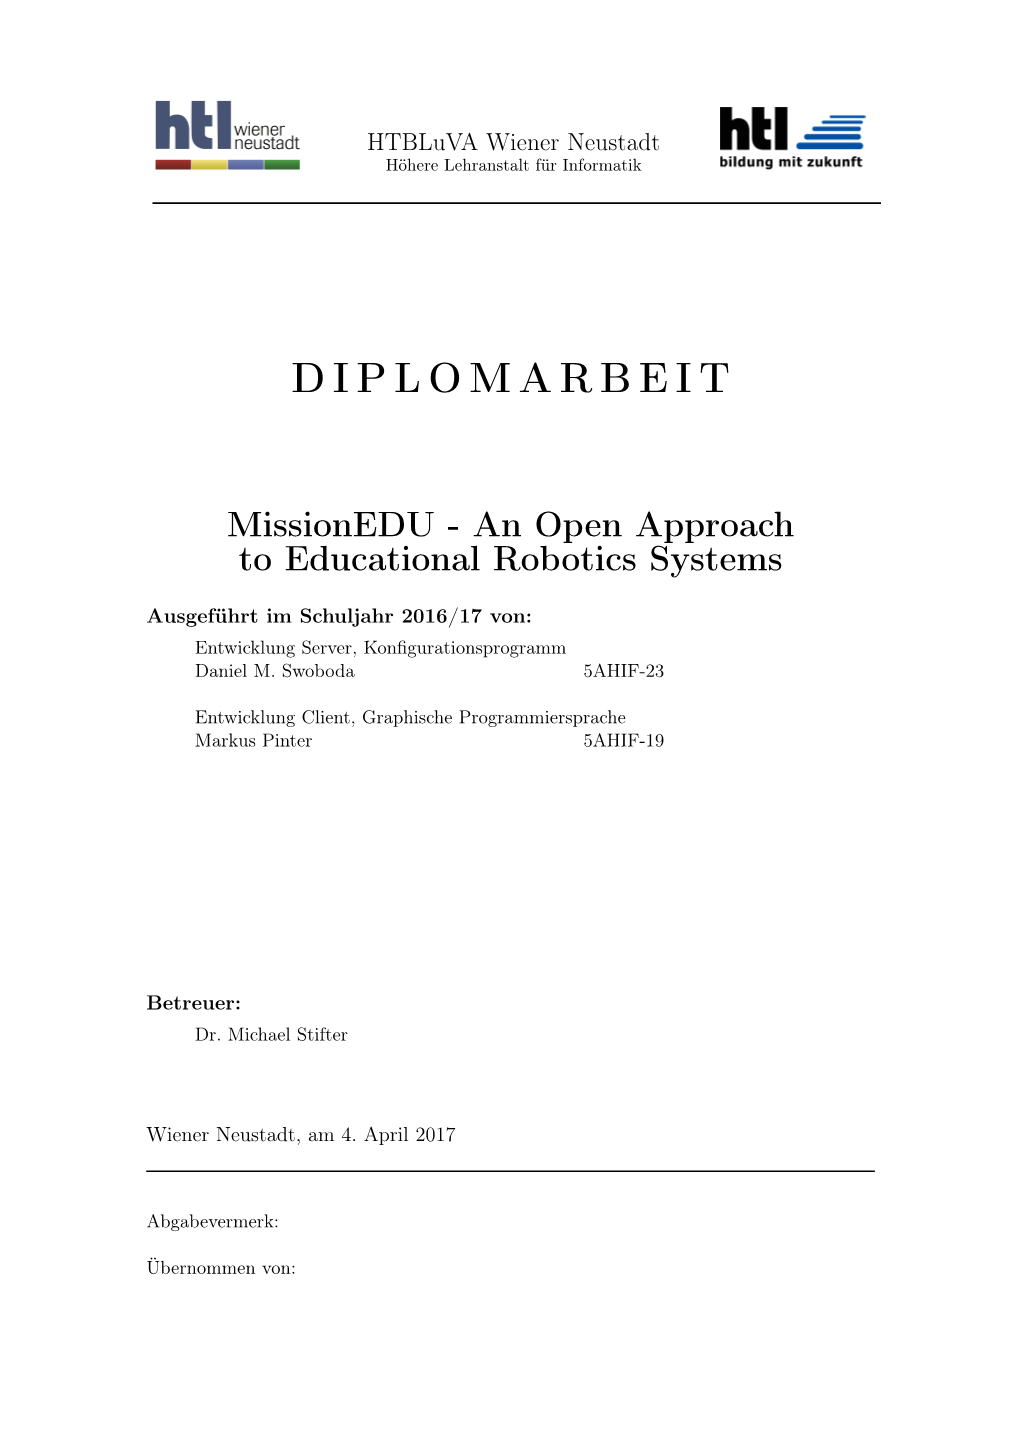 Missionedu - an Open Approach to Educational Robotics Systems